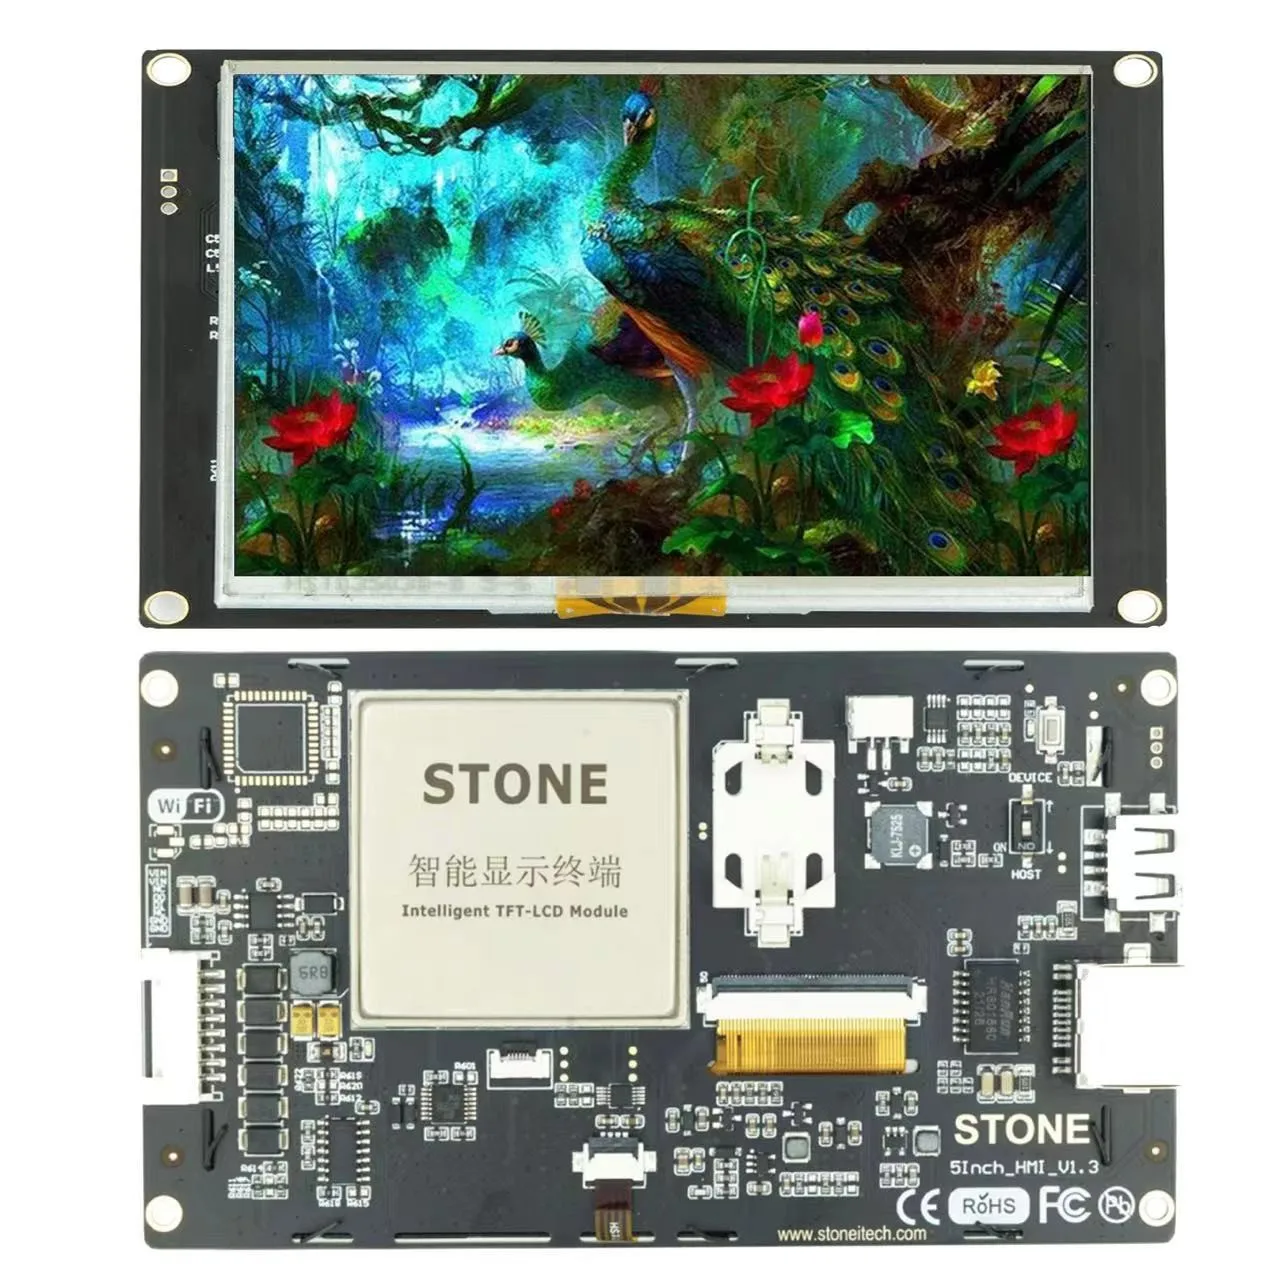 Stone 5 TFT Screen GUI project by STONE designer GUI editor with png/jpg/bmp/svg/gif image files 3-YEAR WORRY-FREE